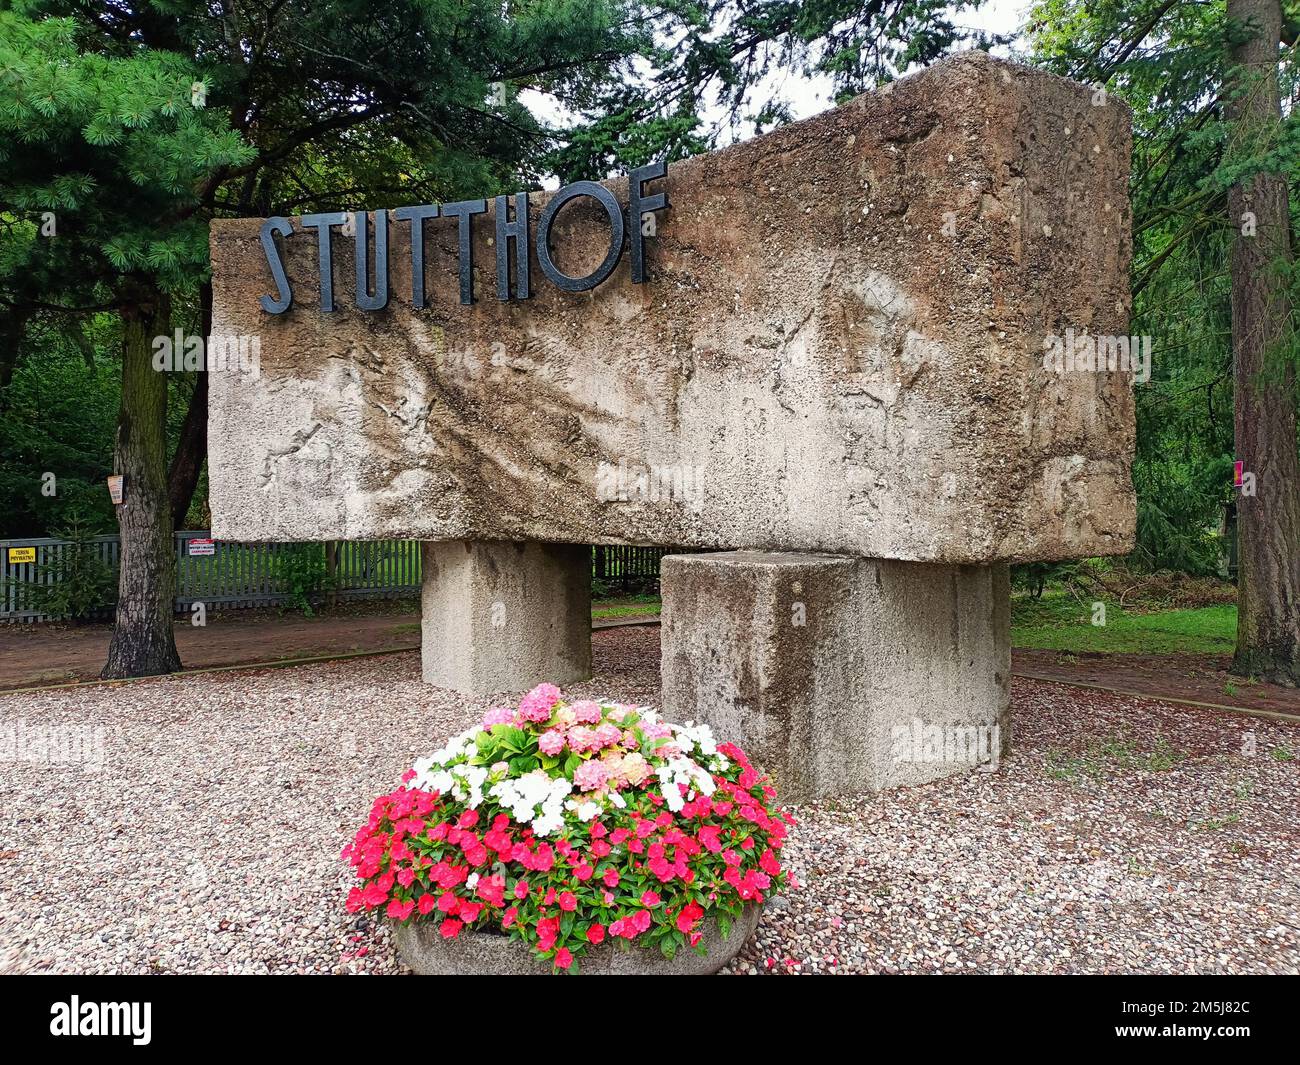 Sztutowo, Pomeranian voivodship 22 August 2022.An obelisk commemorating the victims of the Stutthof concentration camp Stock Photo